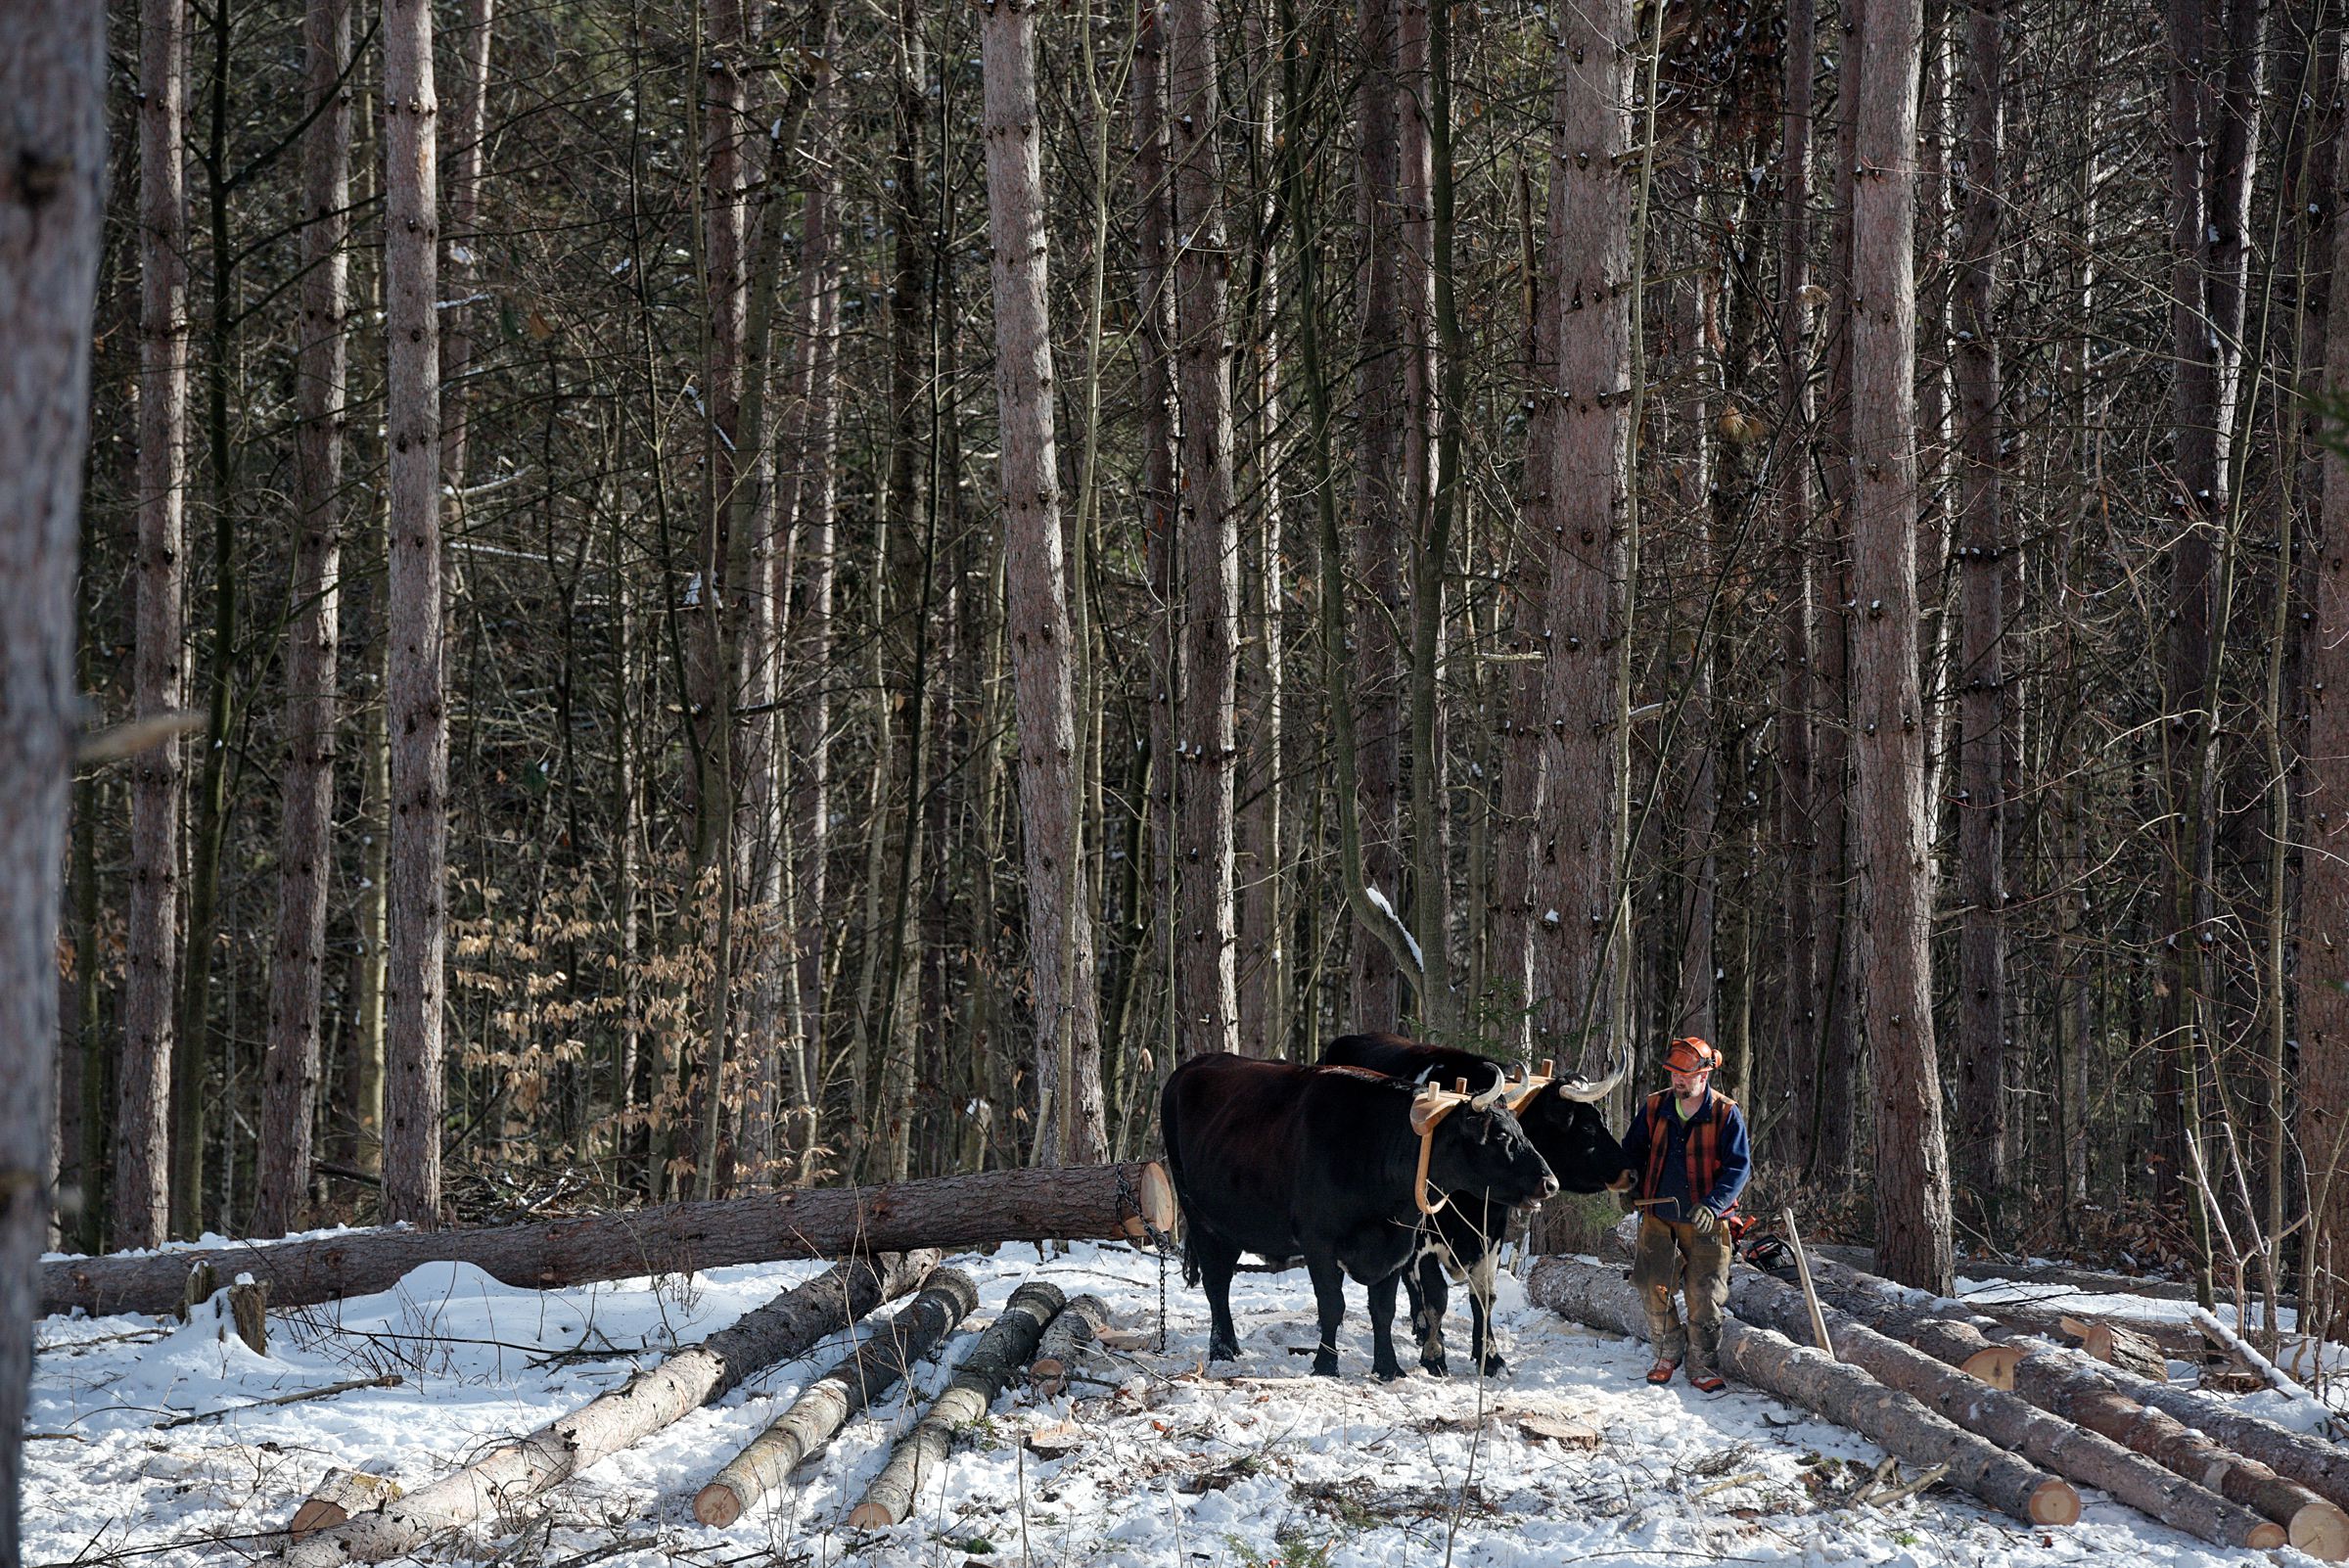 Carl Russell works with his oxen Lucky, left, and Marvelous, right, to clear a stand of red and white pines for pasture on his family’s Bethel Gilead, Vt., land Thursday, Jan 7, 2021. Russell, who also works with horses, moved logs cut by his daughter Tuilelaith Nepveu-McCrory on the site. (Valley News - James M. Patterson) Copyright Valley News. May not be reprinted or used online without permission. Send requests to permission@vnews.com.